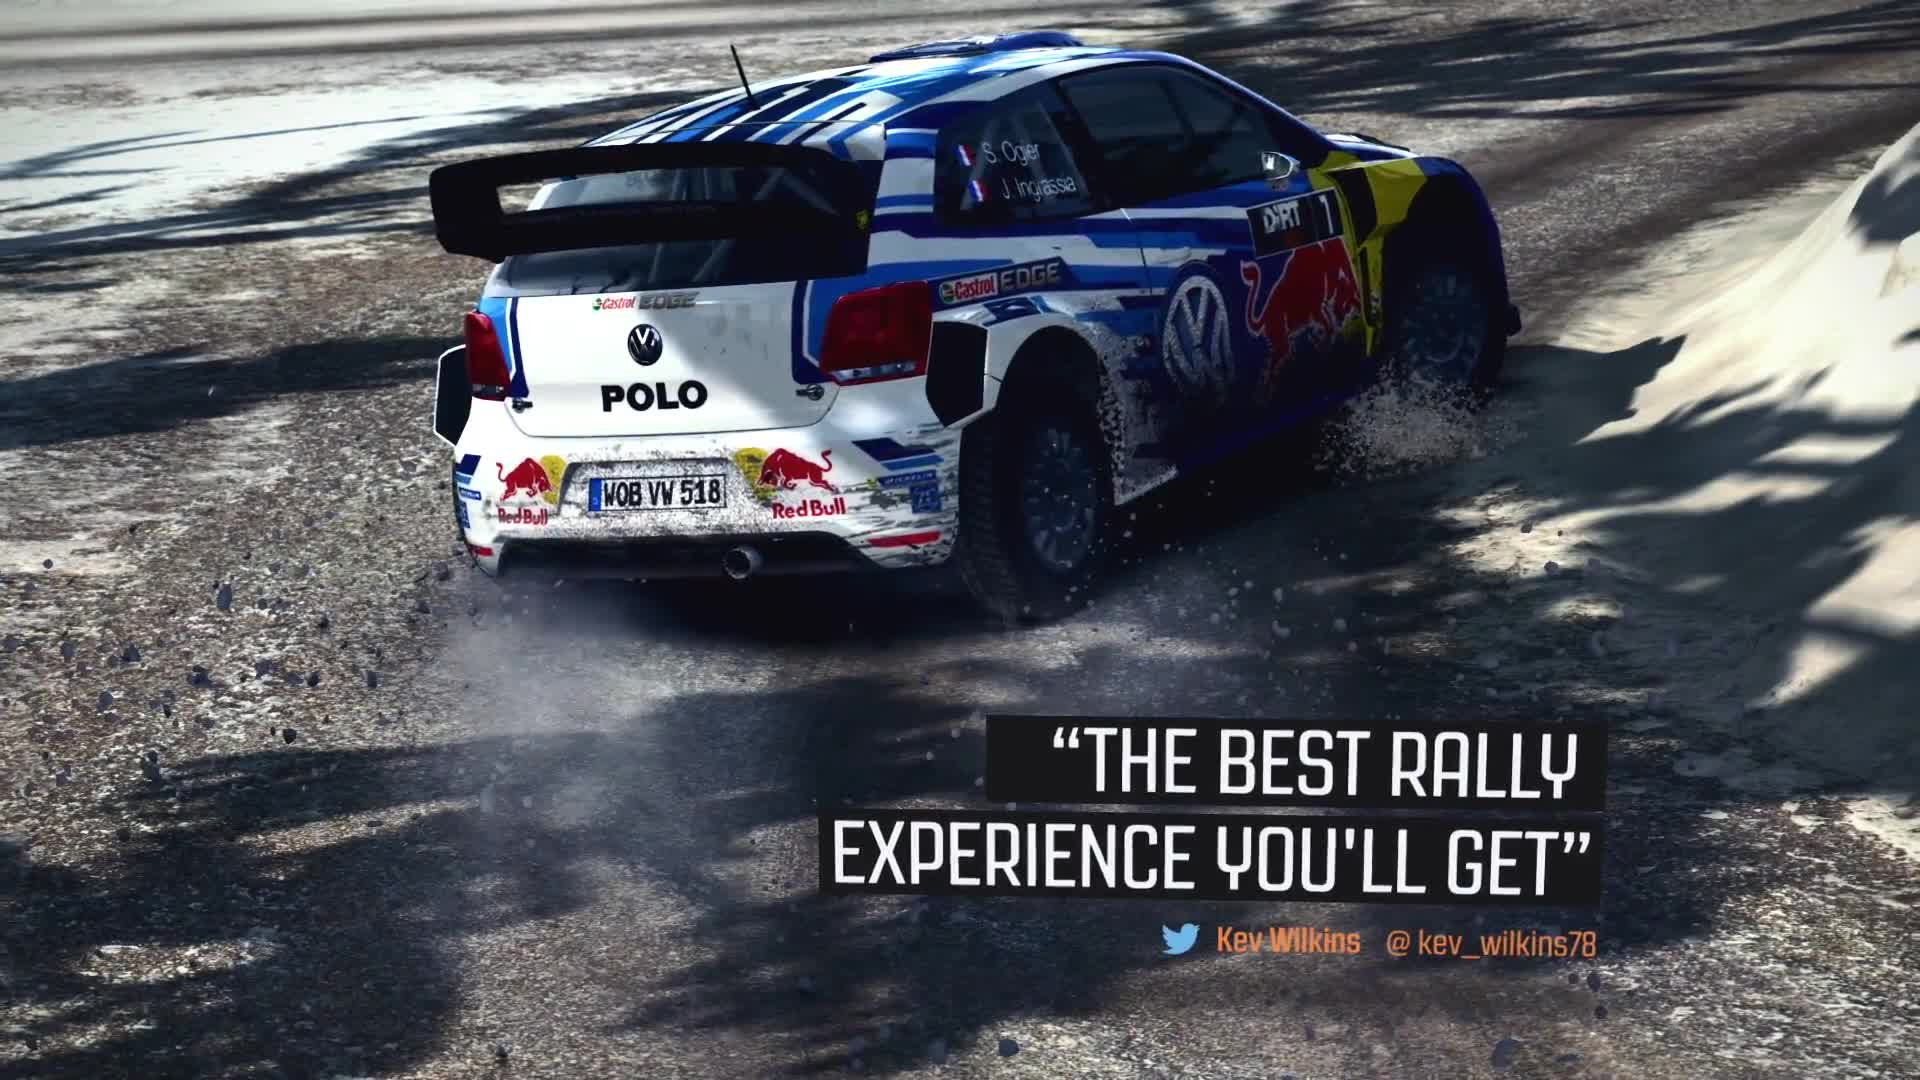 DiRT Rally - The Road Ahead  PC Launch Trailer